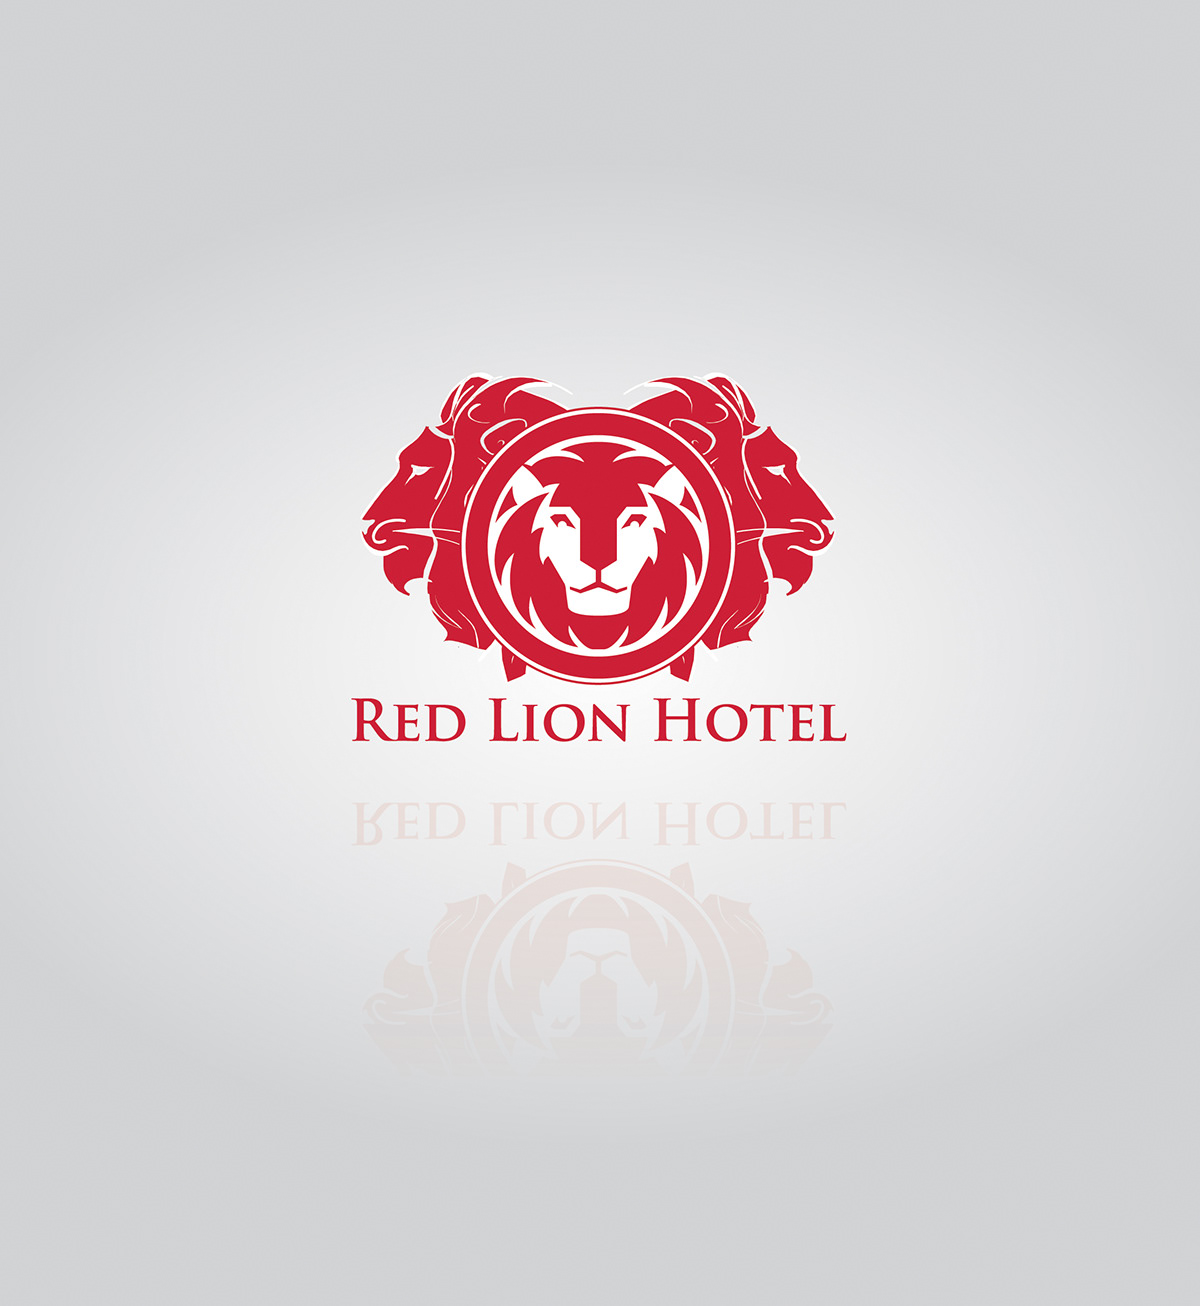 logo lion red lion red lion hotel david somers somers